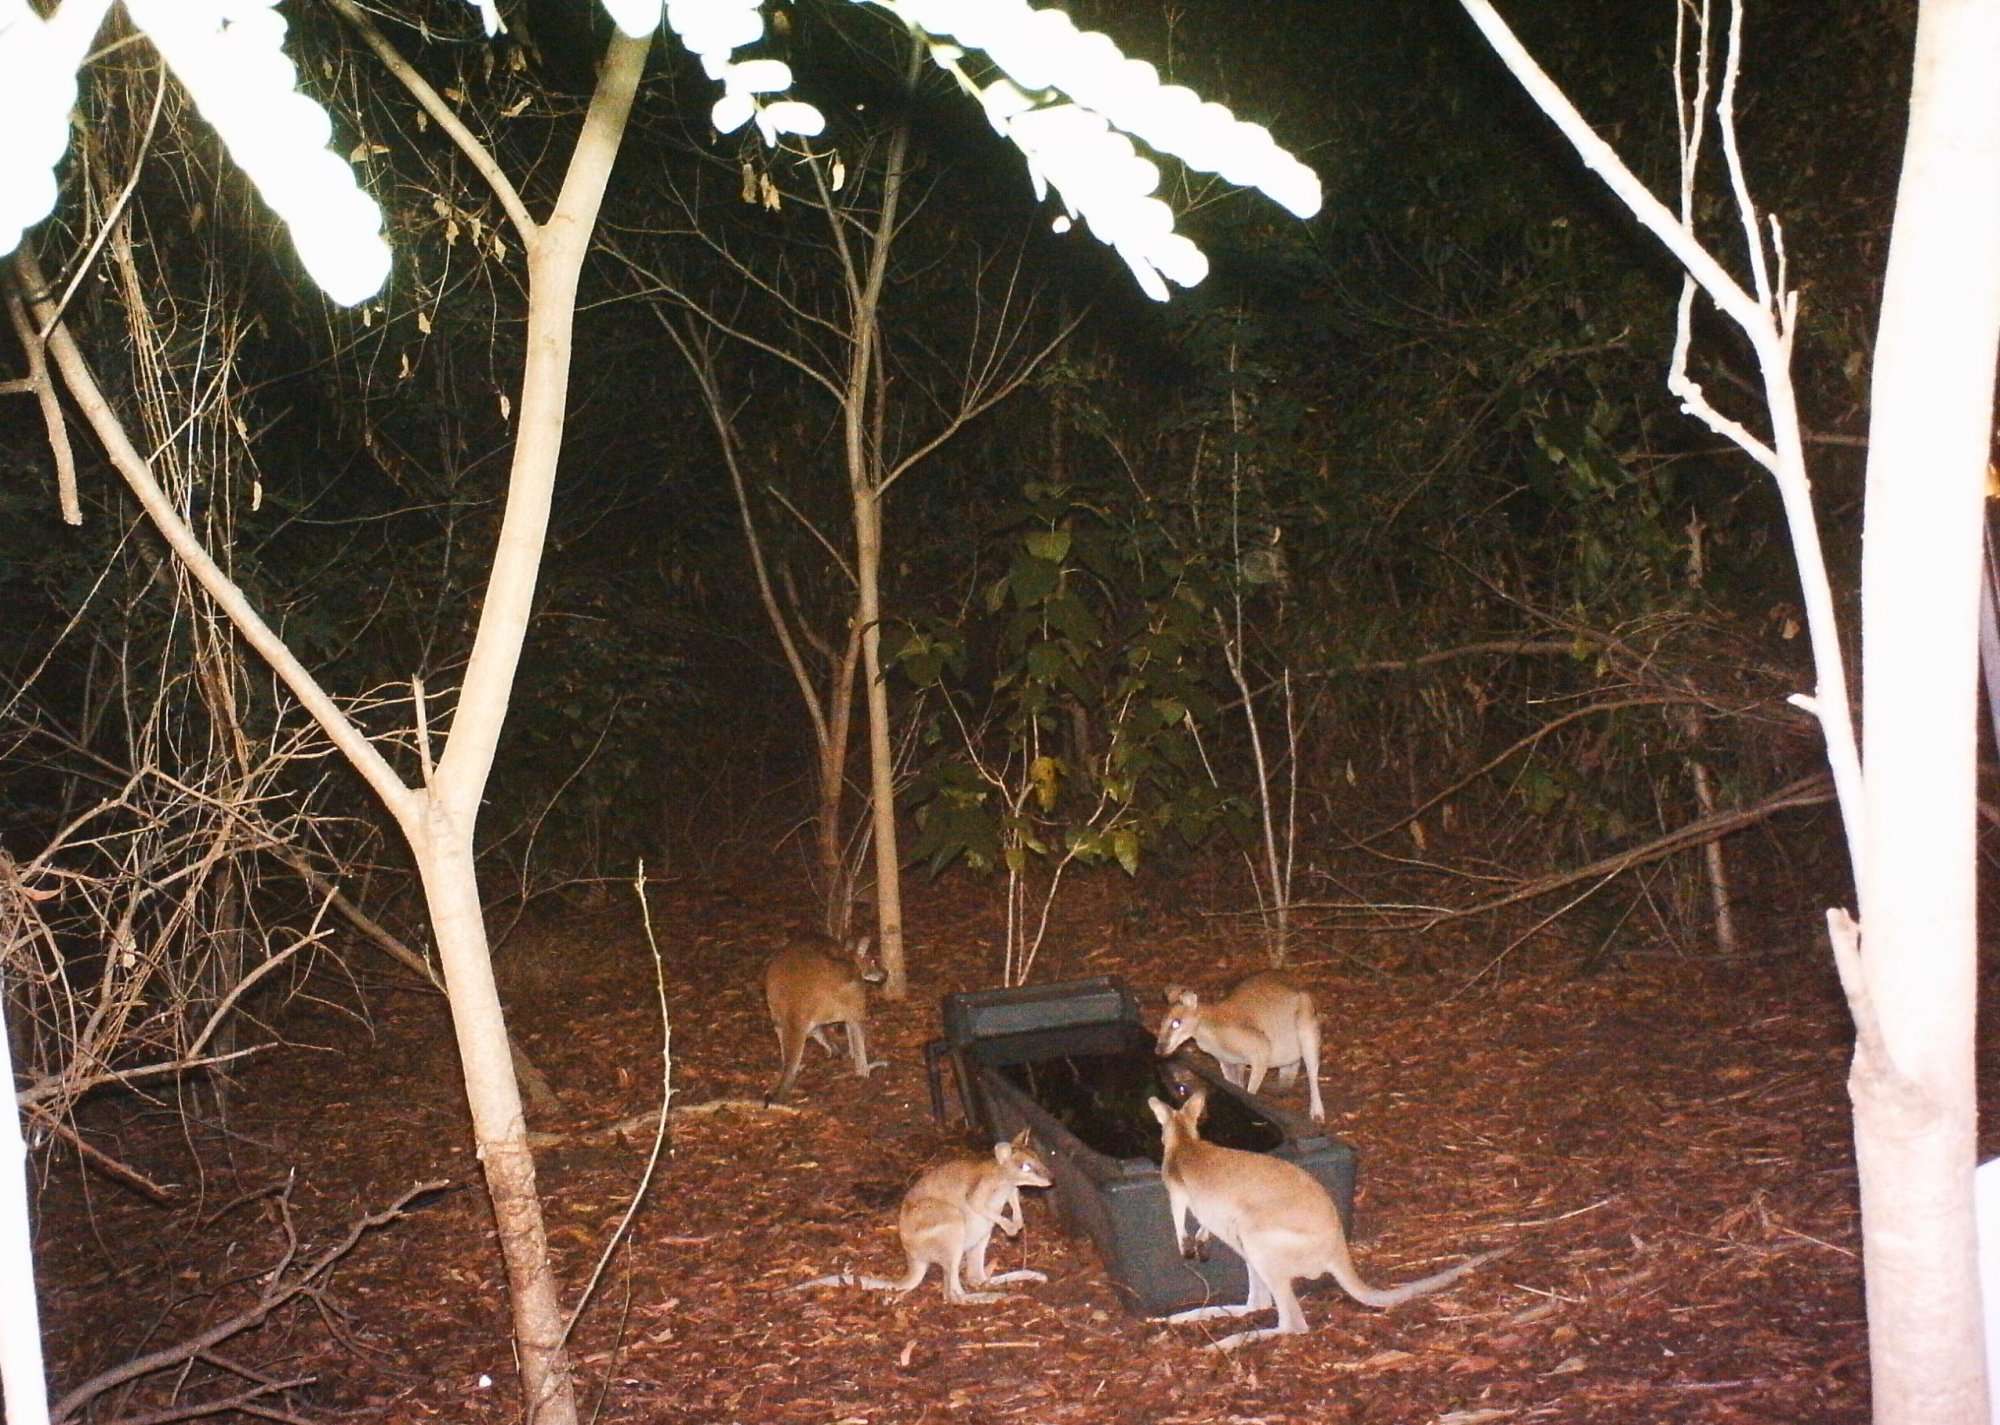 Agile wallabies at east point reserve at night time around a water trough